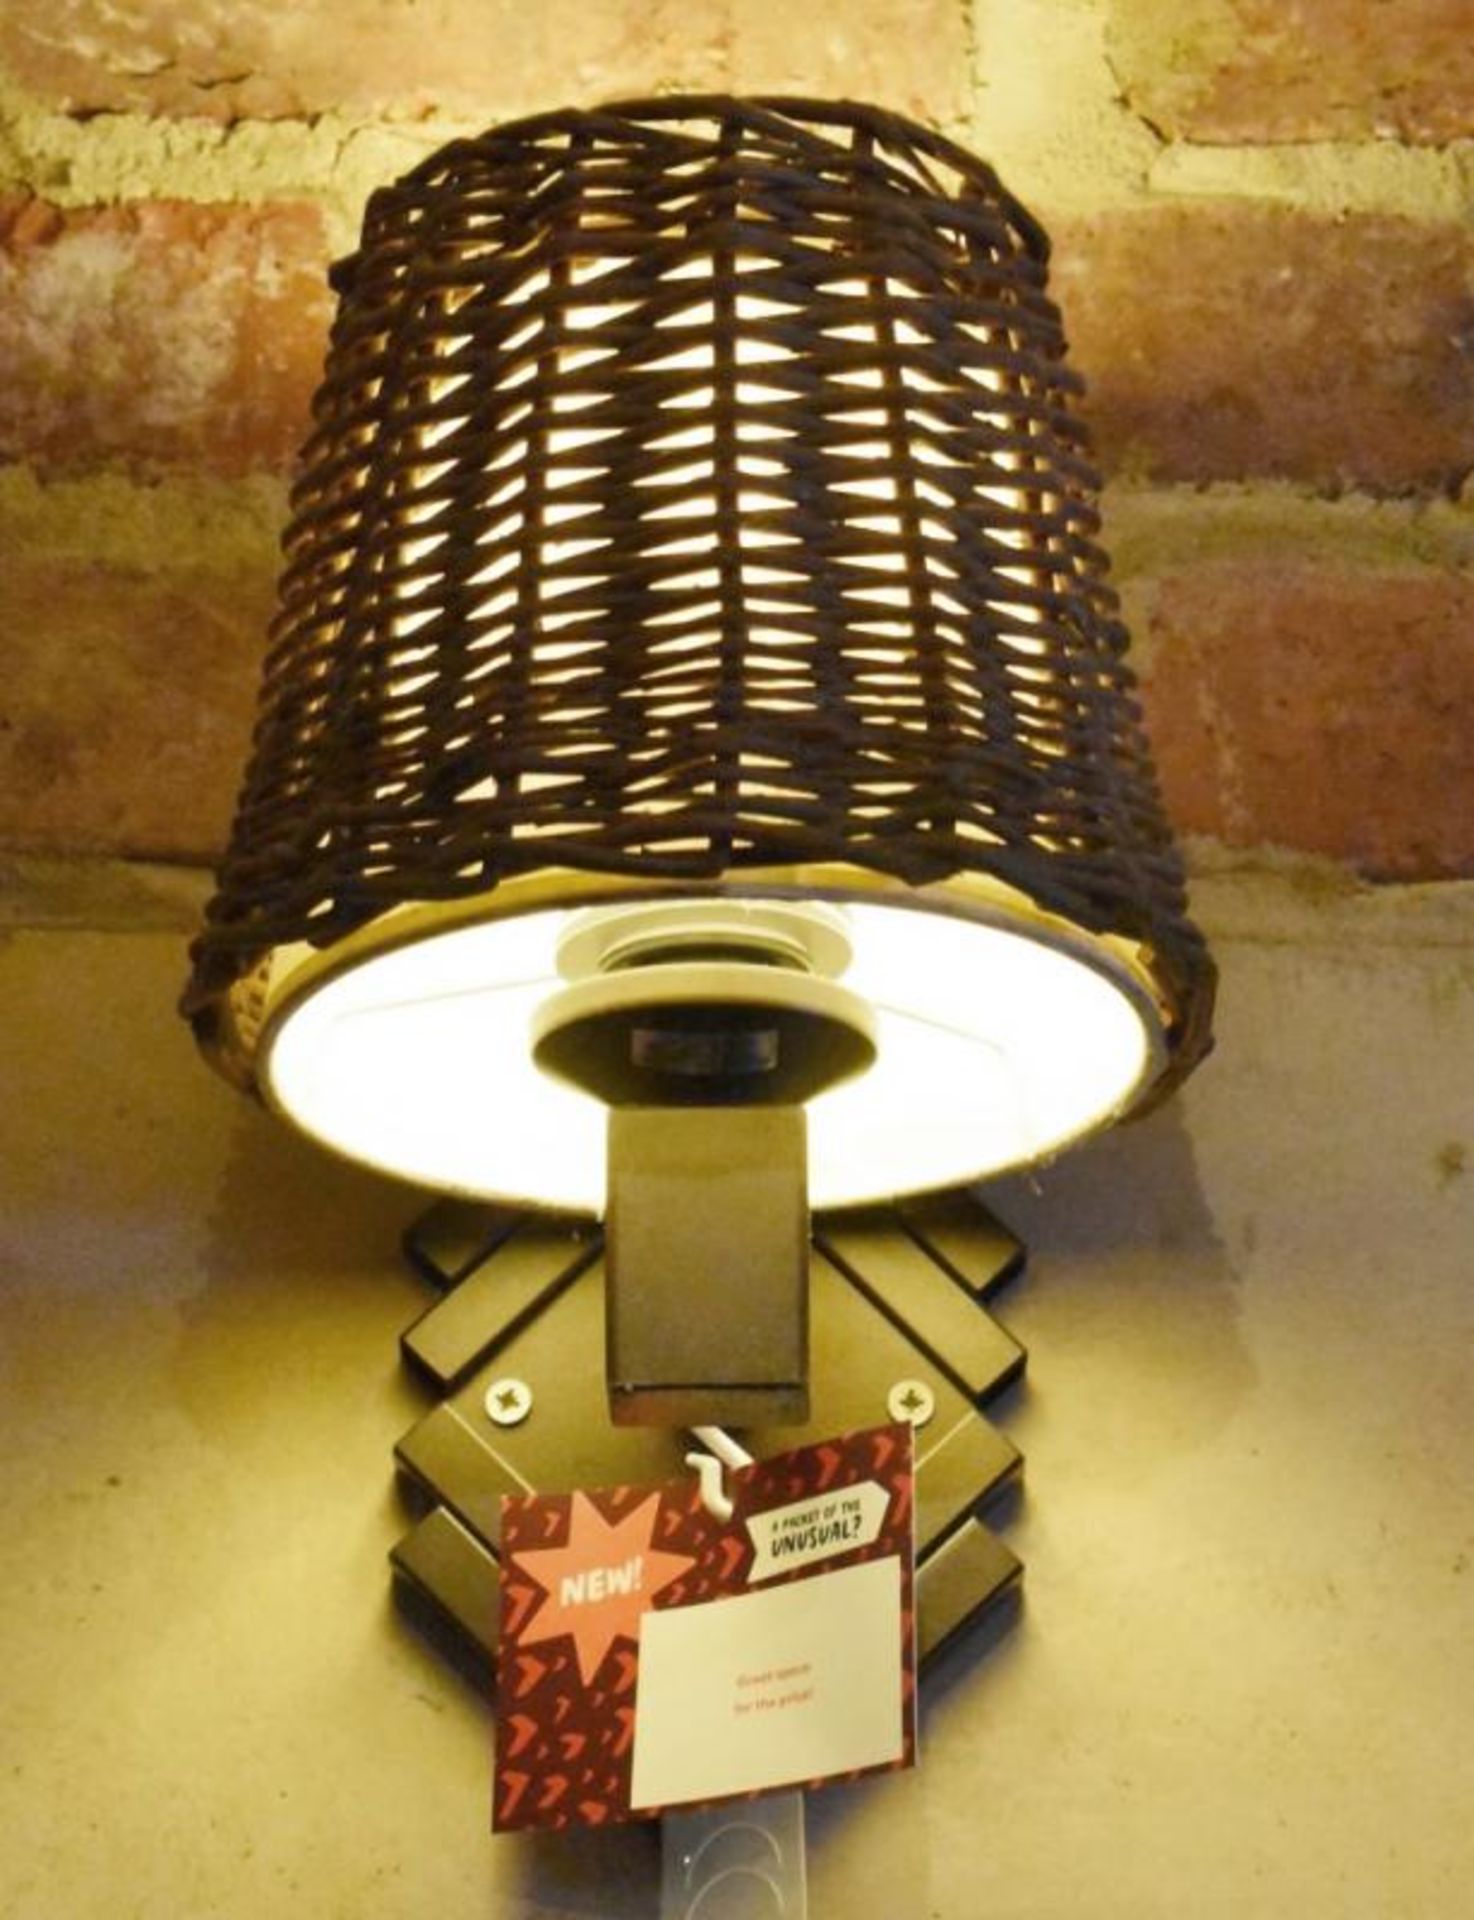 5 x Wall Lights With Rustic Basket Shades - CL461 - Location: London W3 - Image 2 of 2